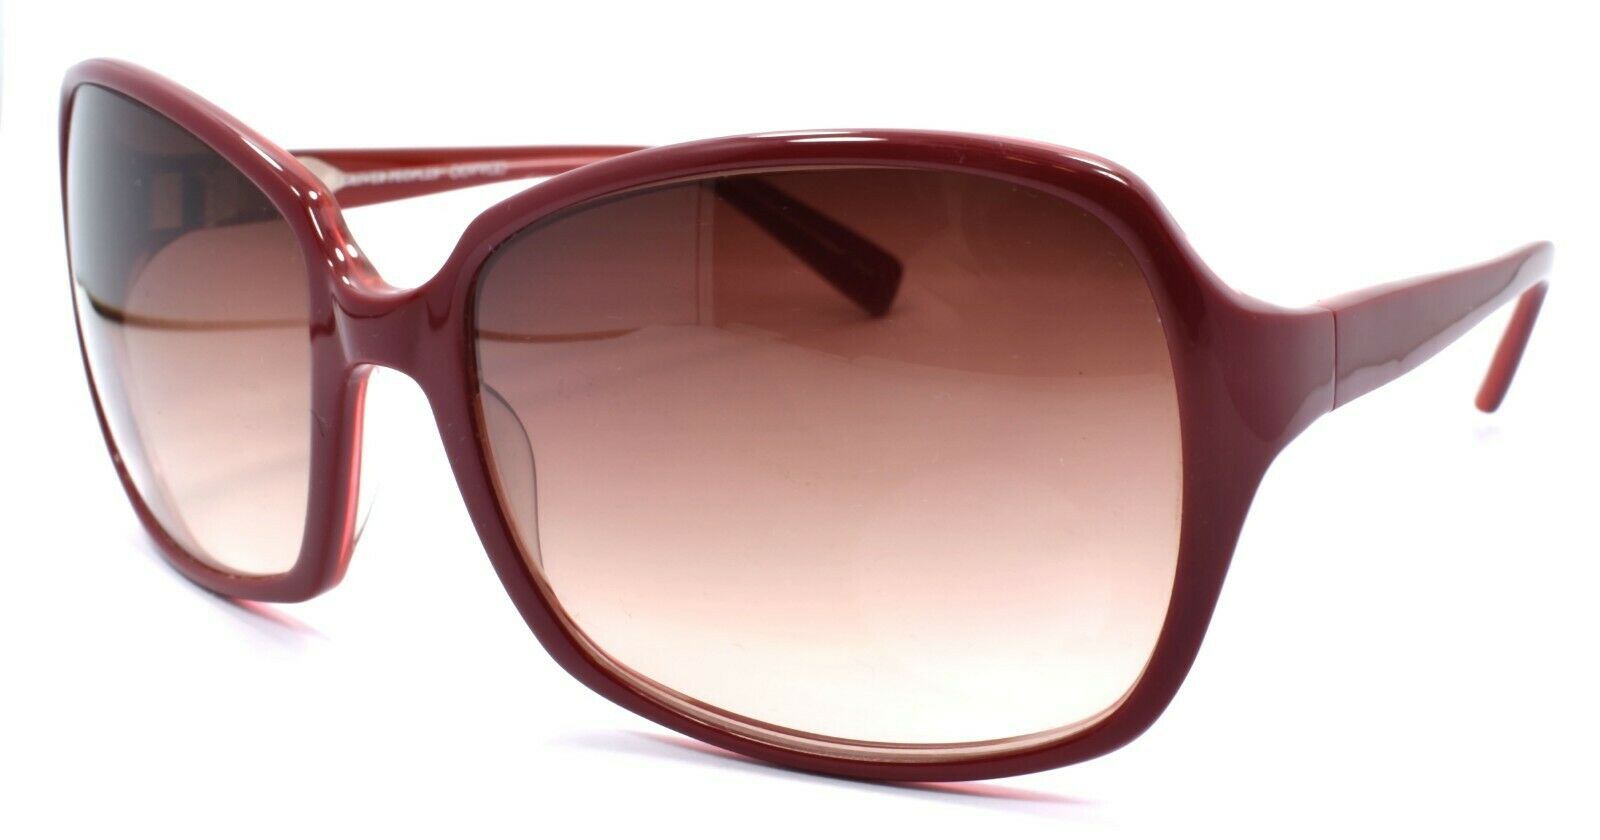 1-Oliver Peoples Candice SCA Women's Sunglasses Red / Brown Gradient JAPAN-Does not apply-IKSpecs